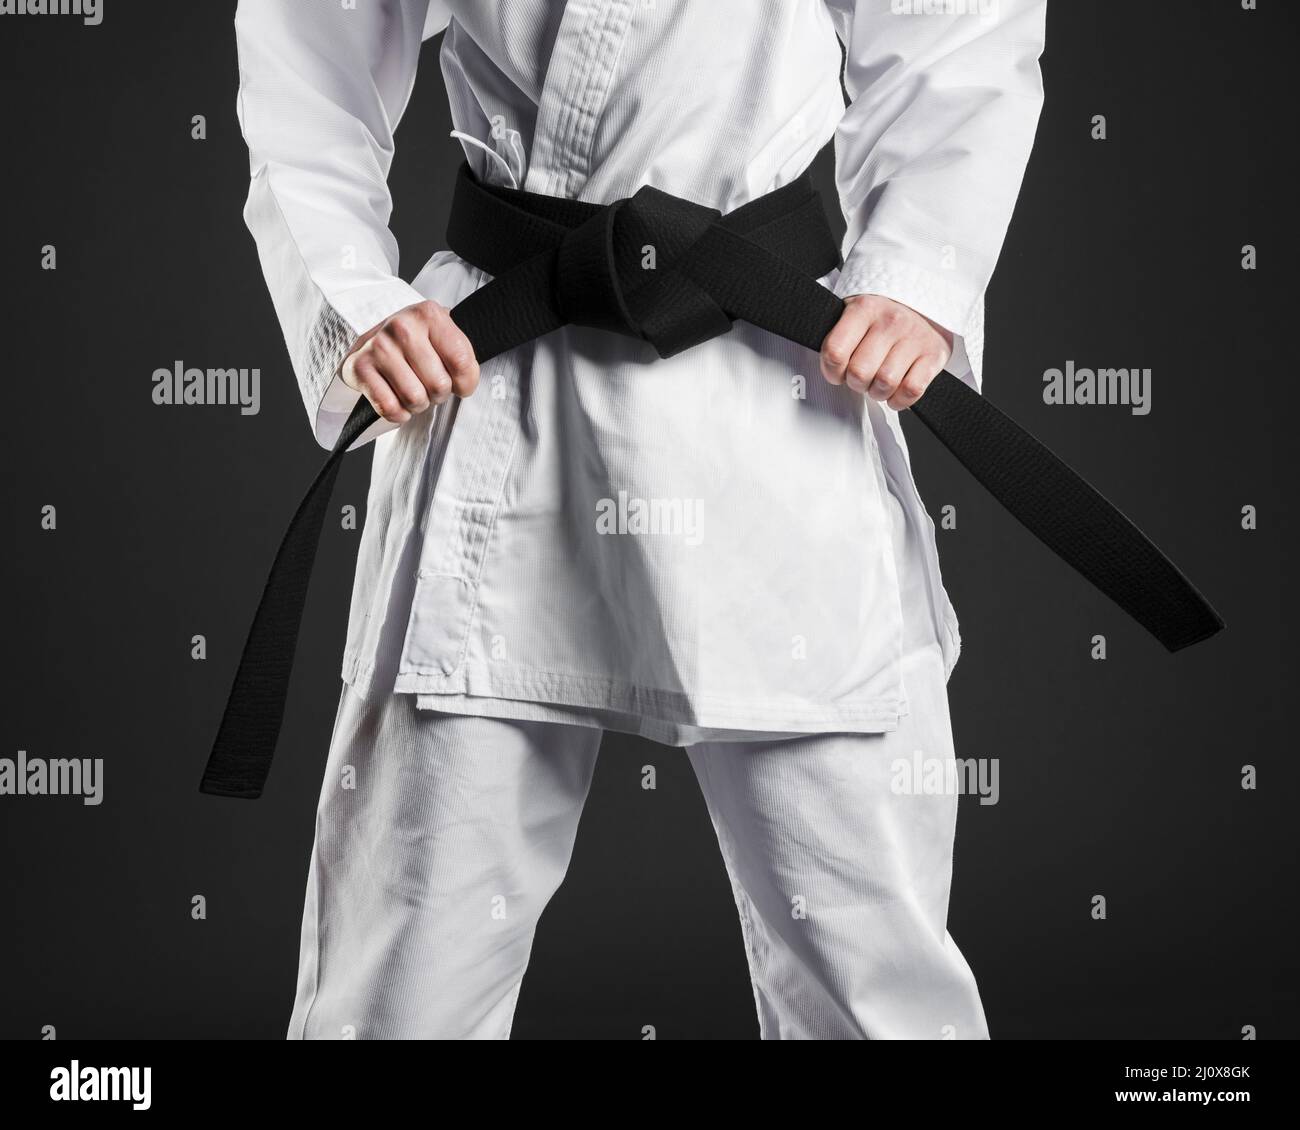 Karate fighter proudly holding black belt. High quality beautiful photo concept Stock Photo